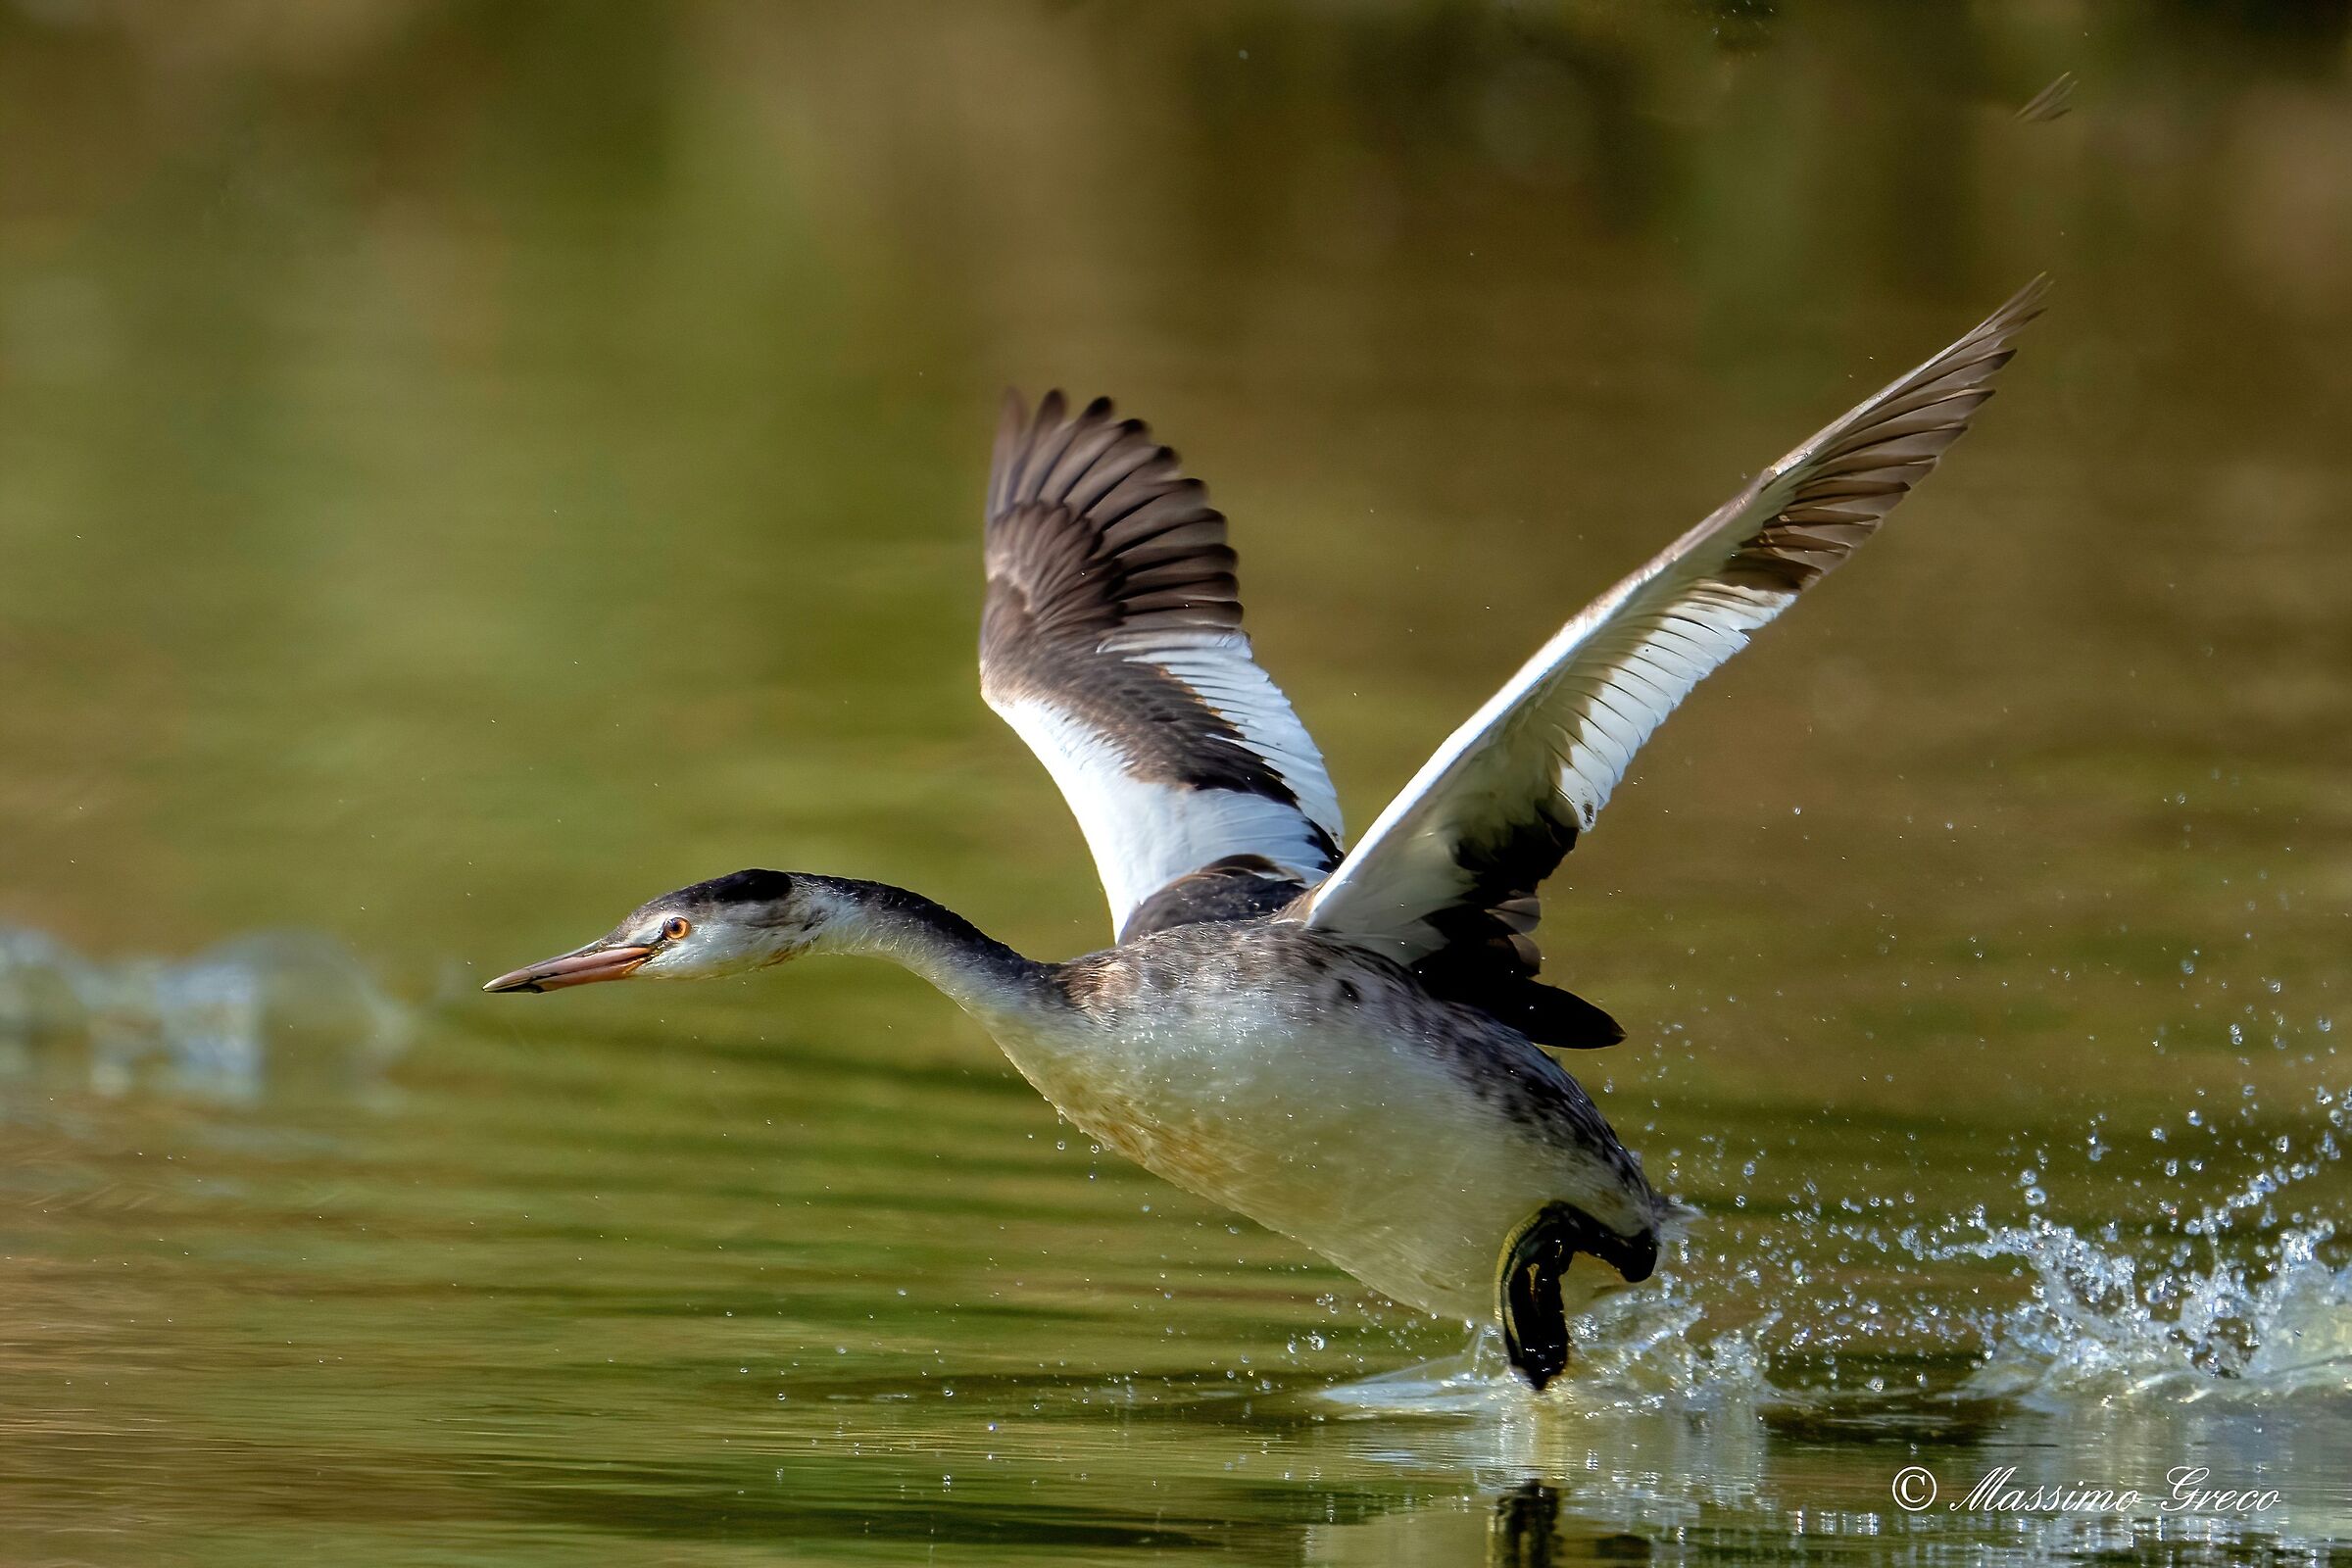 The take-off of the Great Grebe (Podiceps cristatus) ...